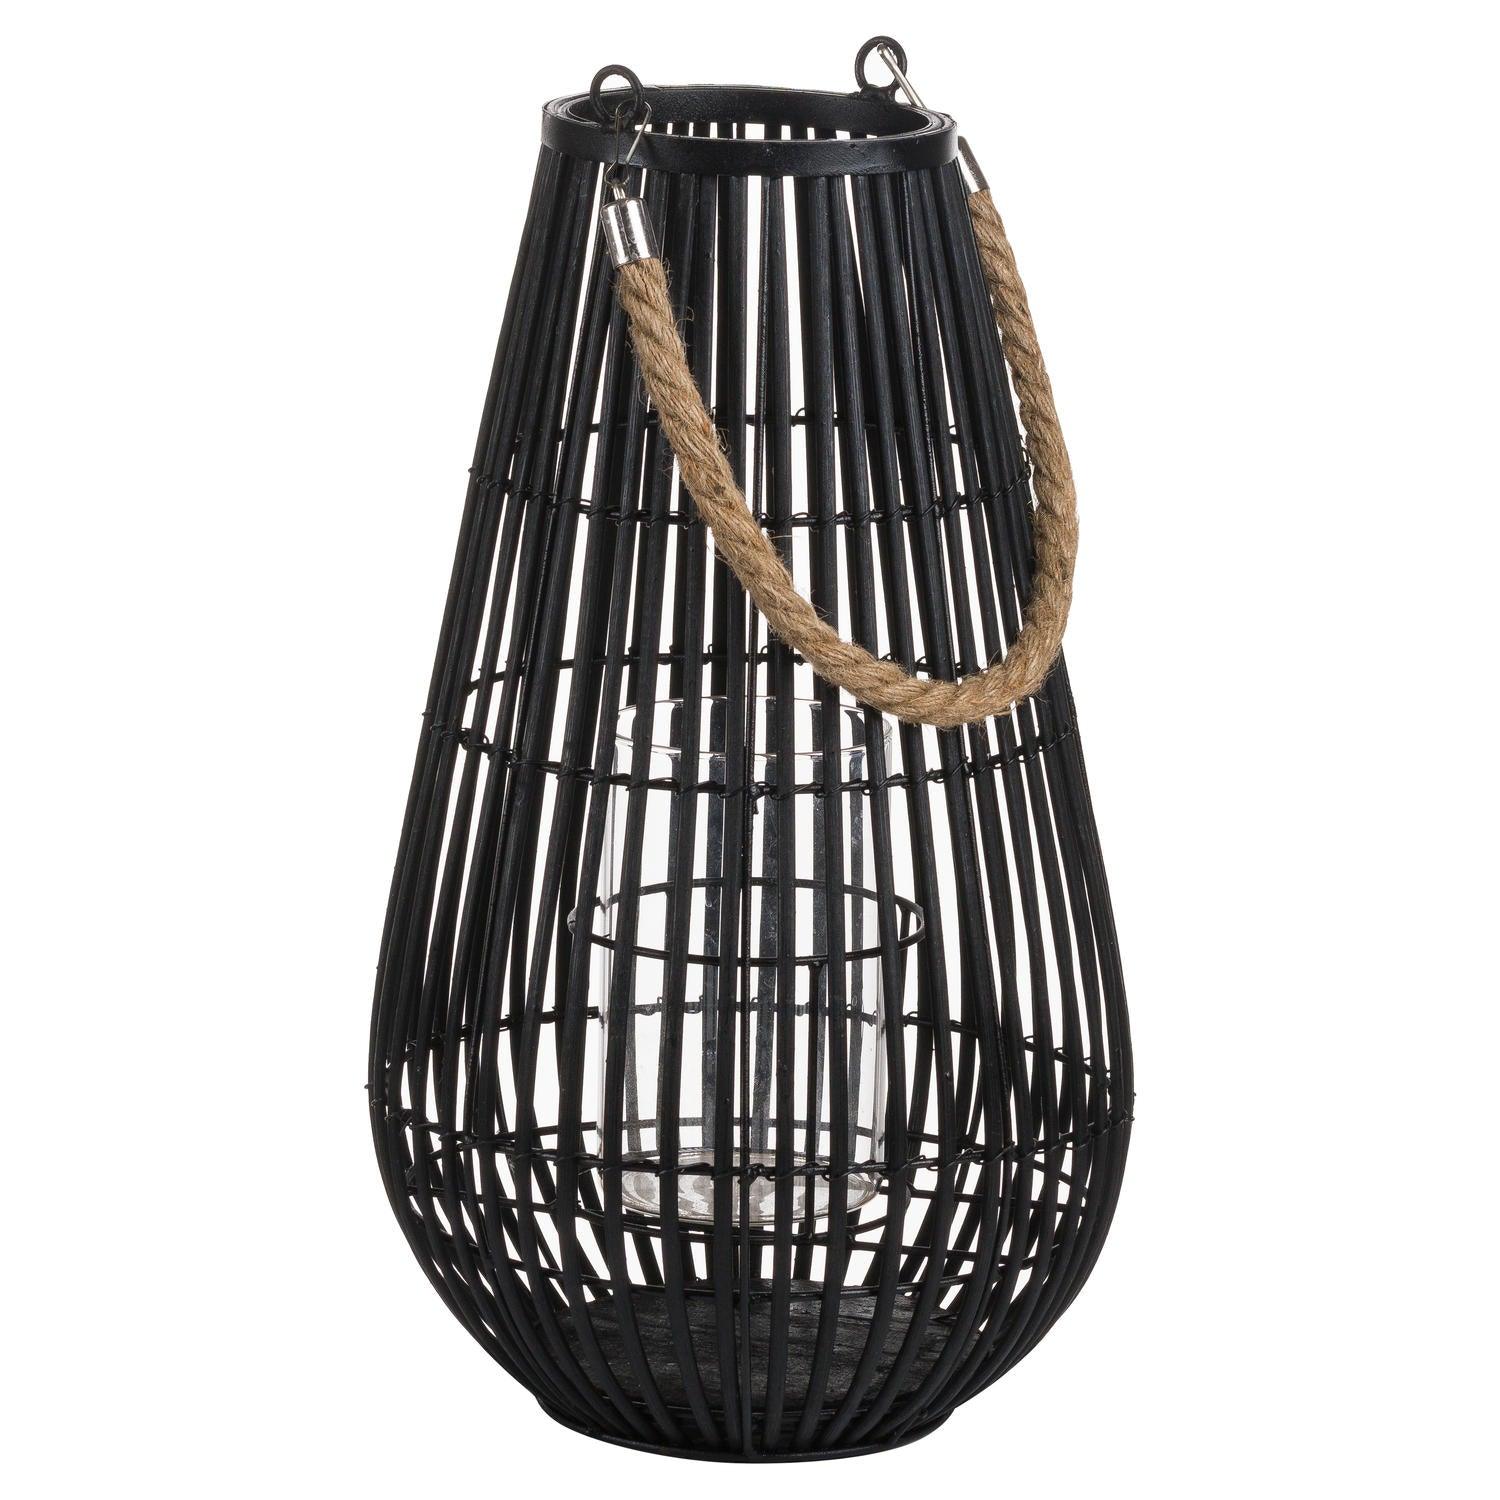 View Domed Rattan Lantern With Rope Detail information